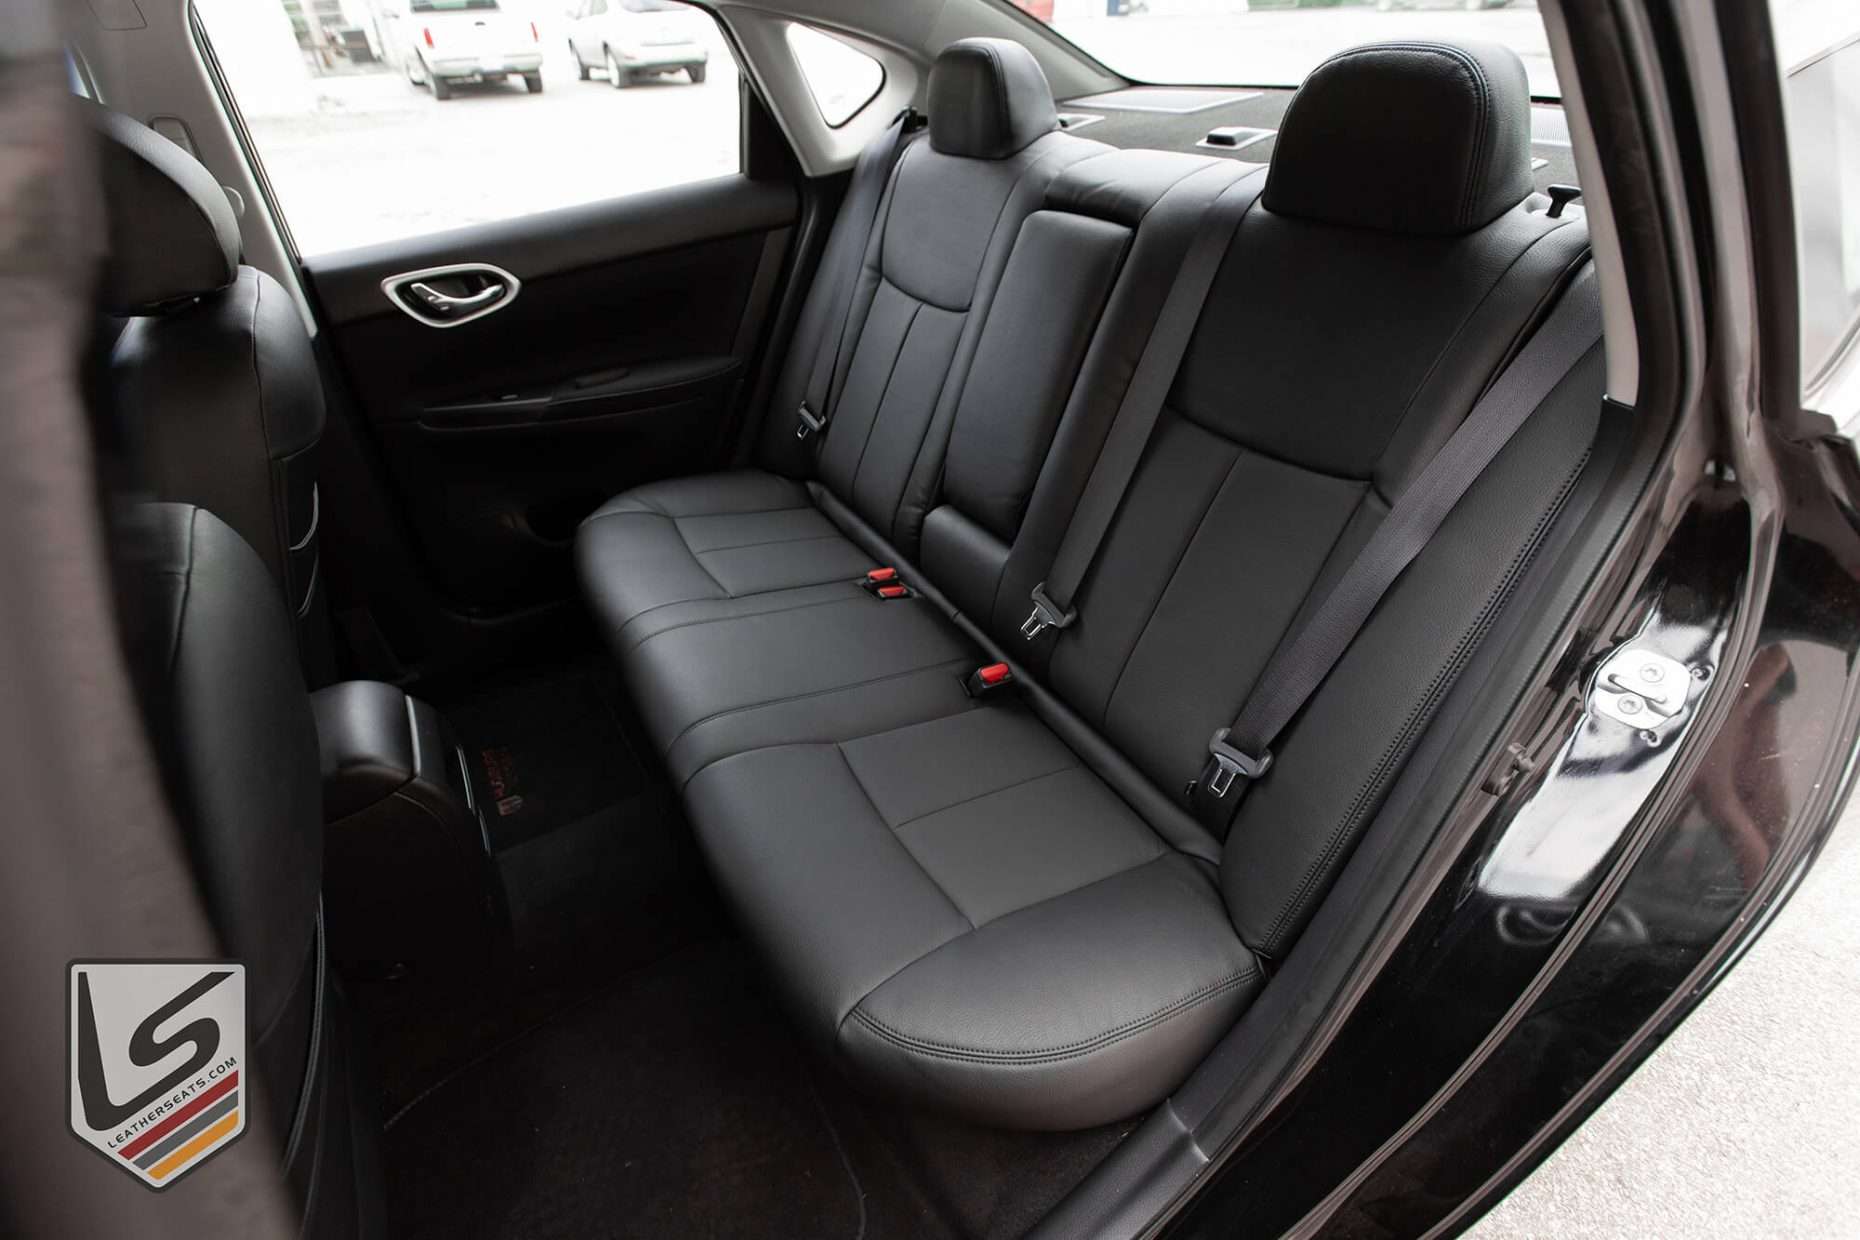 Custom Black leather seats for Nissan Sentra - Rear seats from driver's side